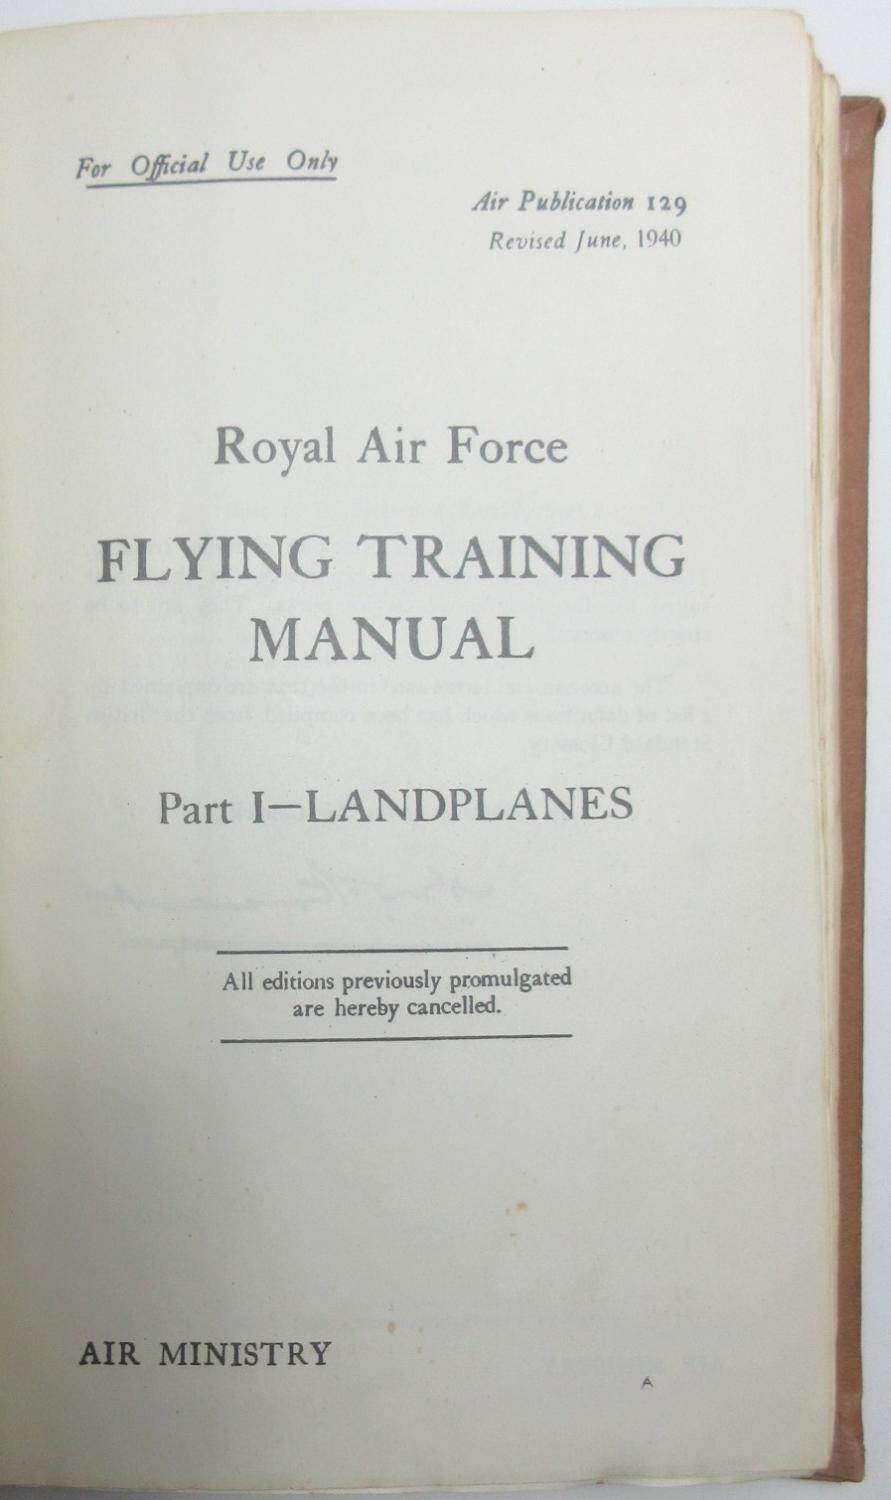 royal-air-force-flying-training-manual-part-1-landplanes-by-air-ministry-publisher-1940